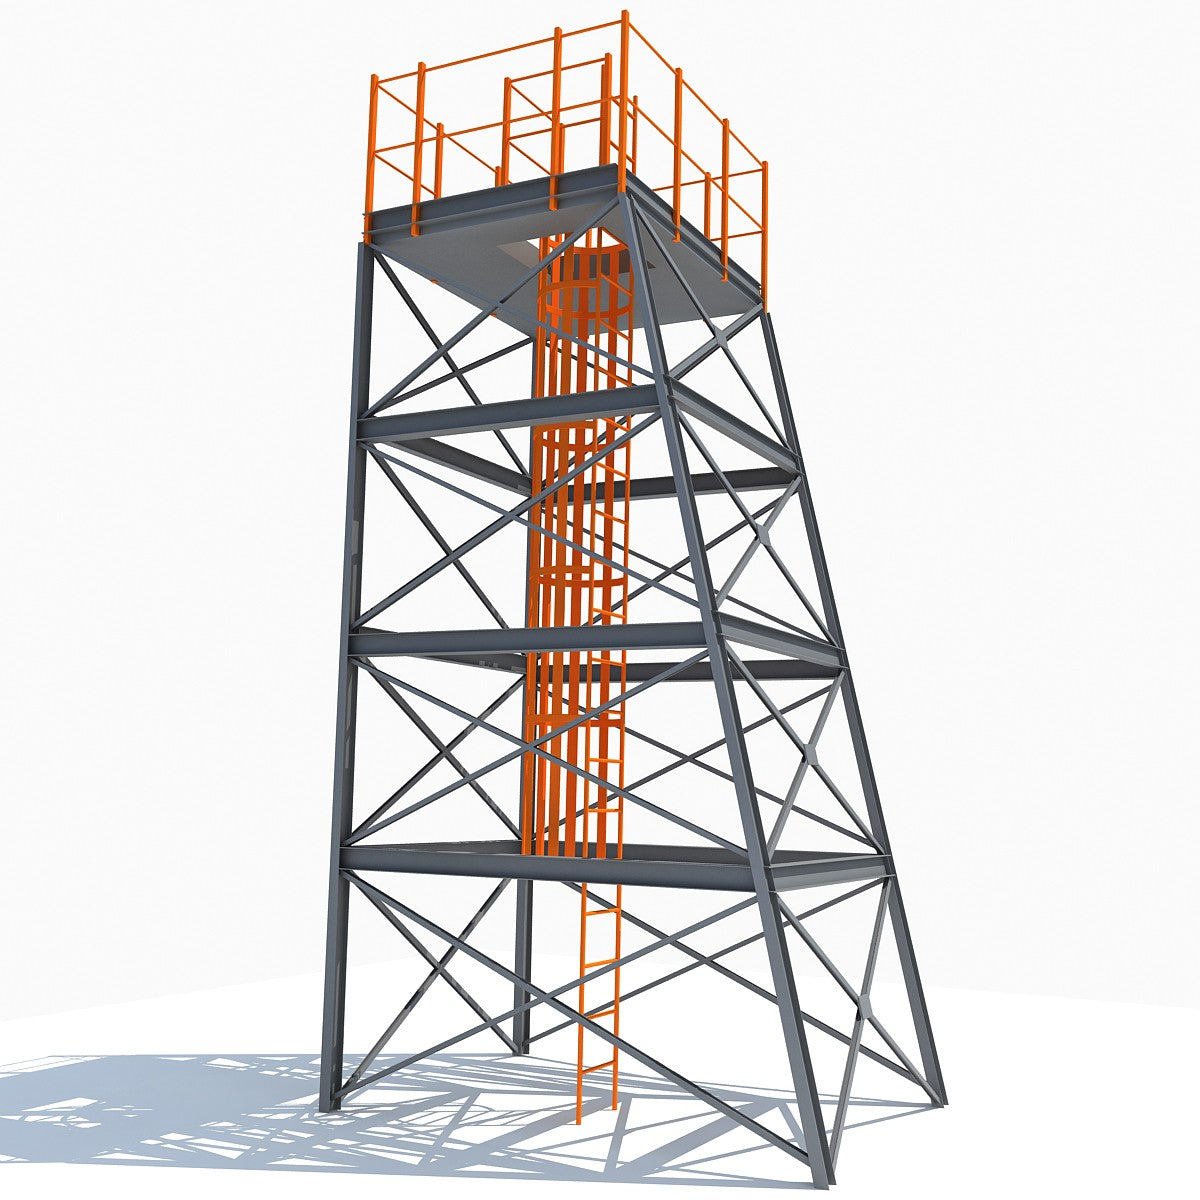 3D Industrial Towers Models